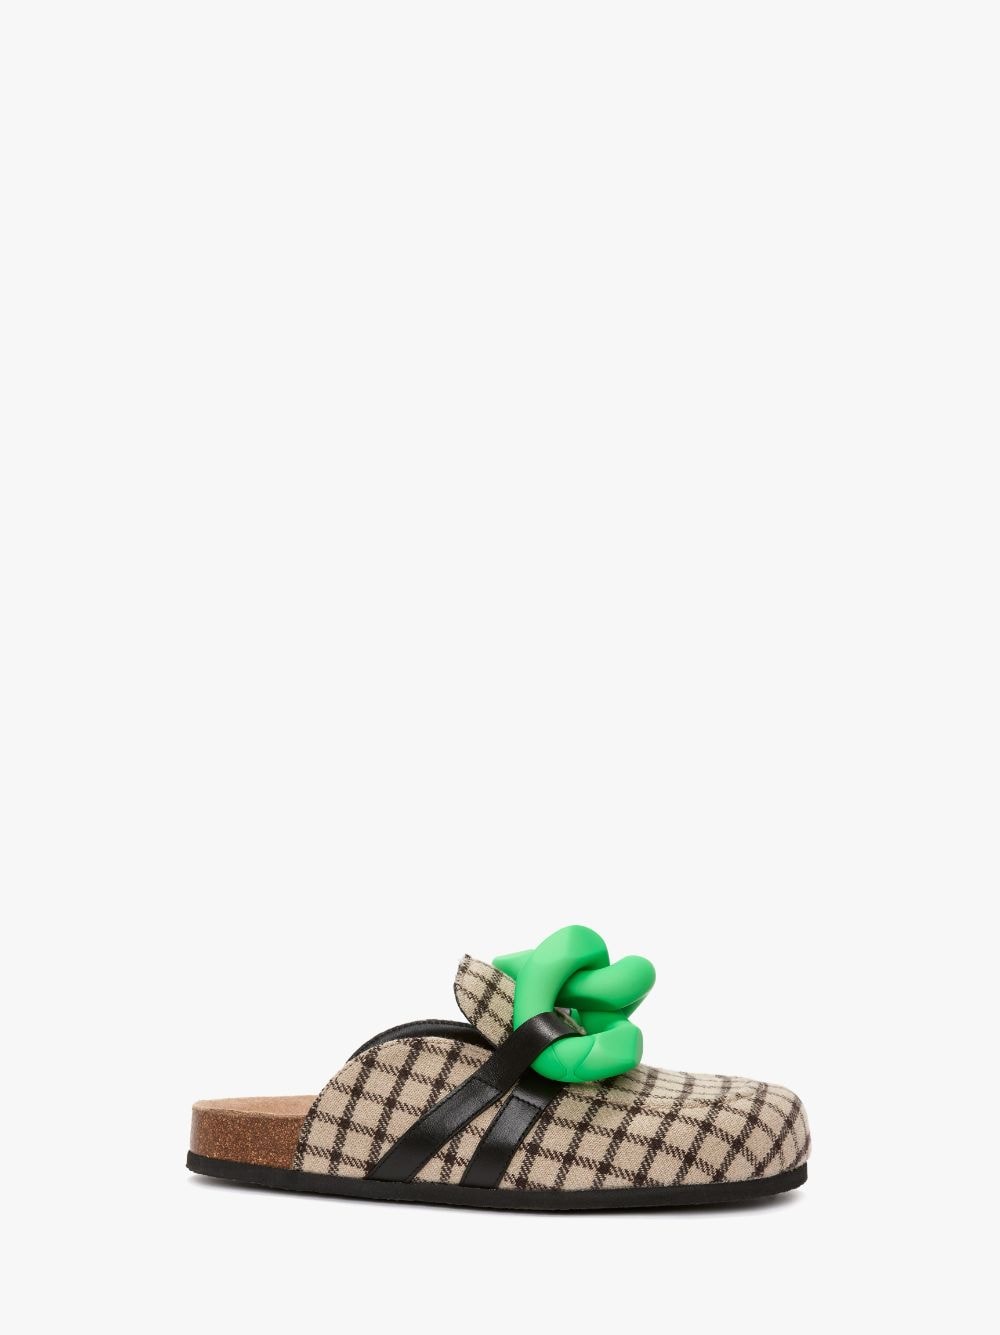 JW ANDERSON CHAIN LOAFER FELT MULES